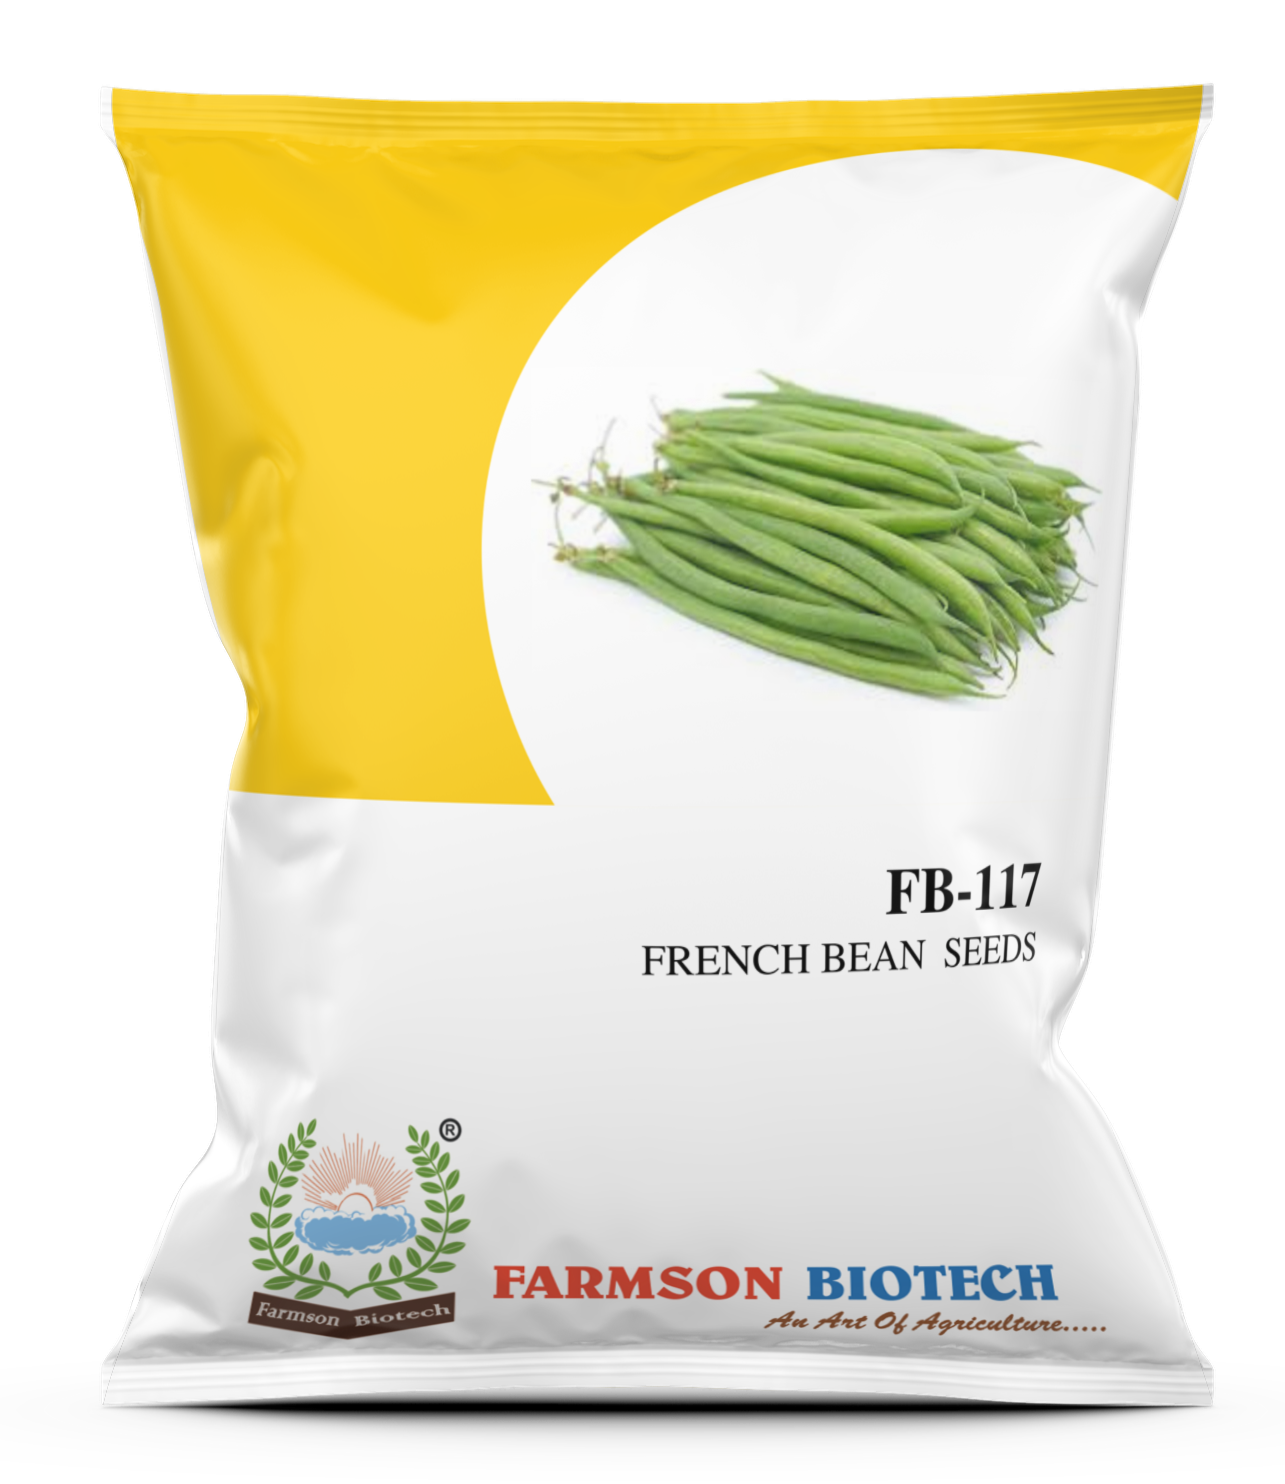 FB-117 FRENCH BEAN SEEDS